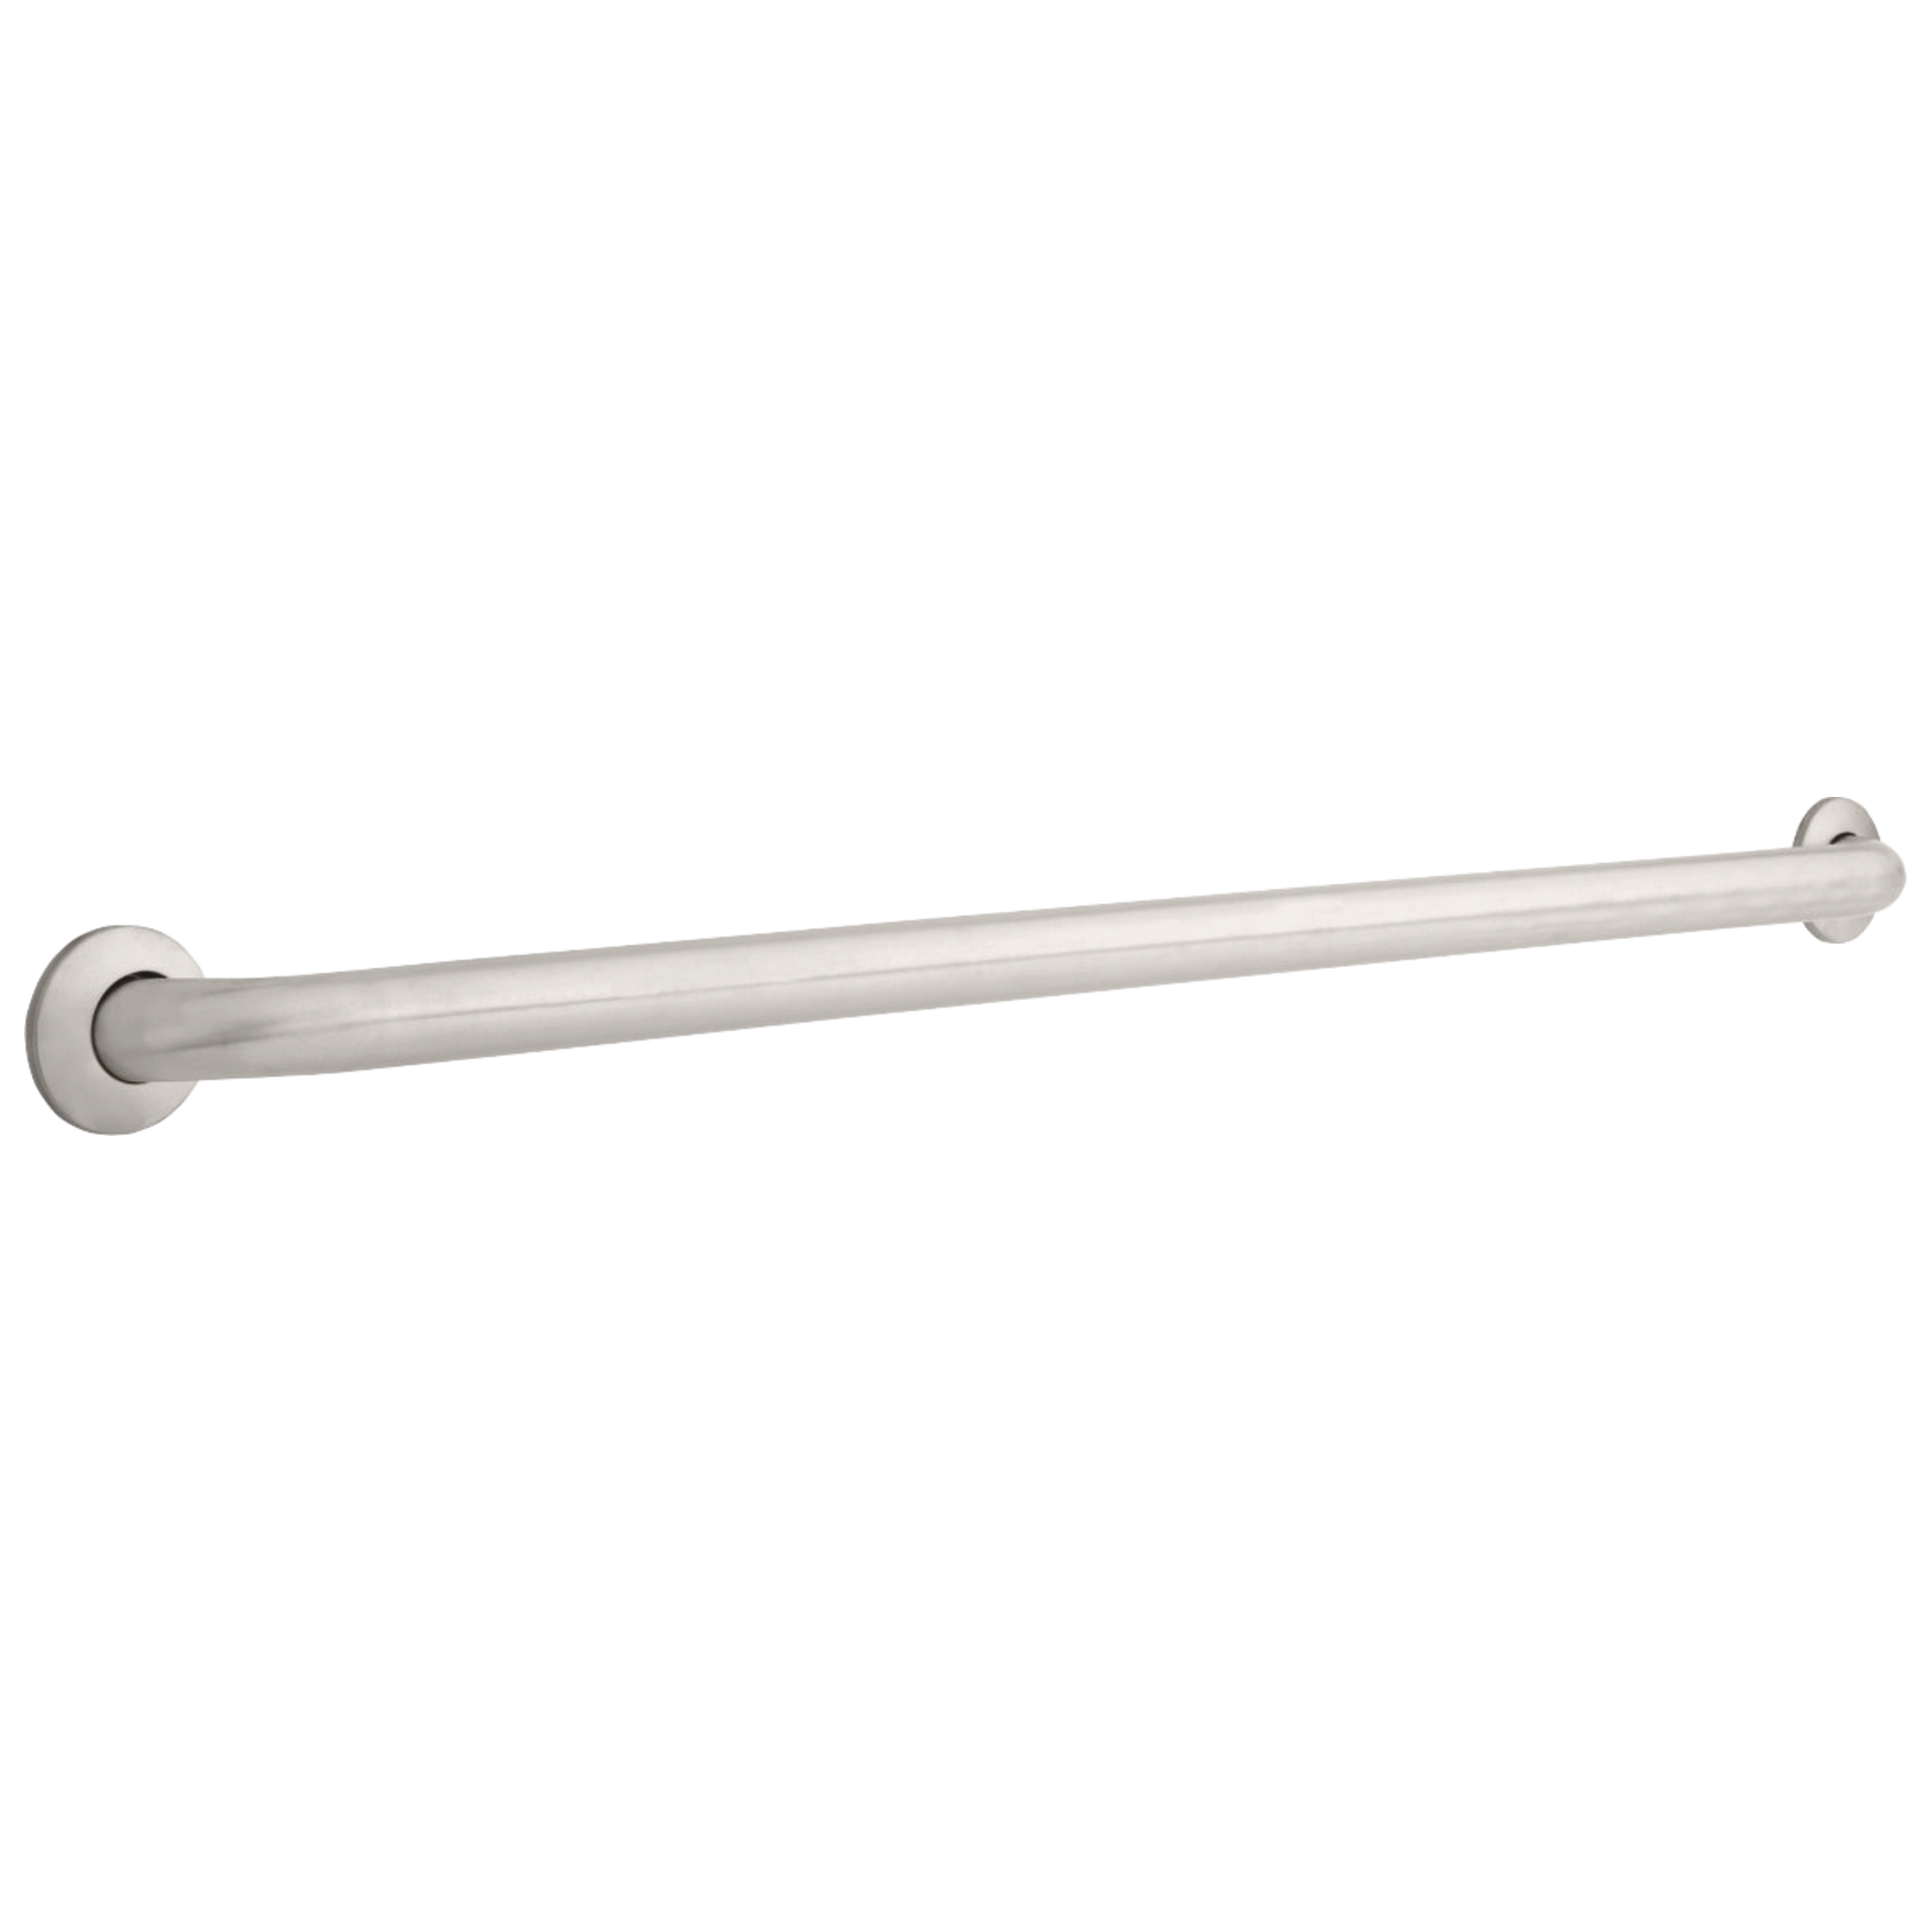 Delta Commercial Other: 1-1/2" x 42" ADA Grab Bar, Concealed Mounting